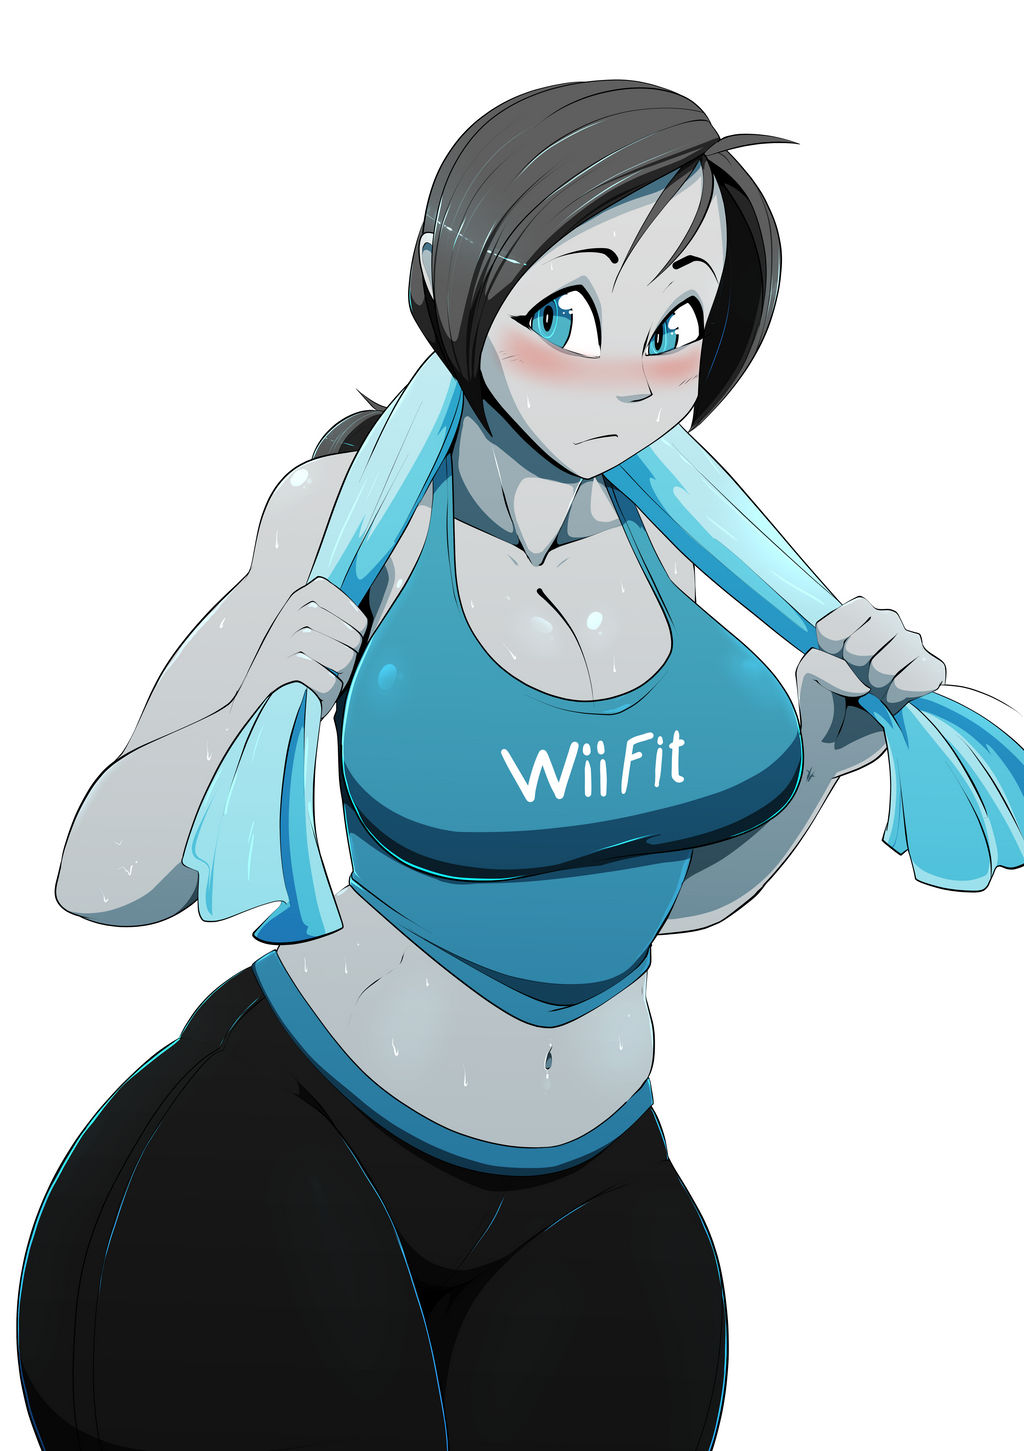 Wii Fit Trainer By Vale City On Deviantart 